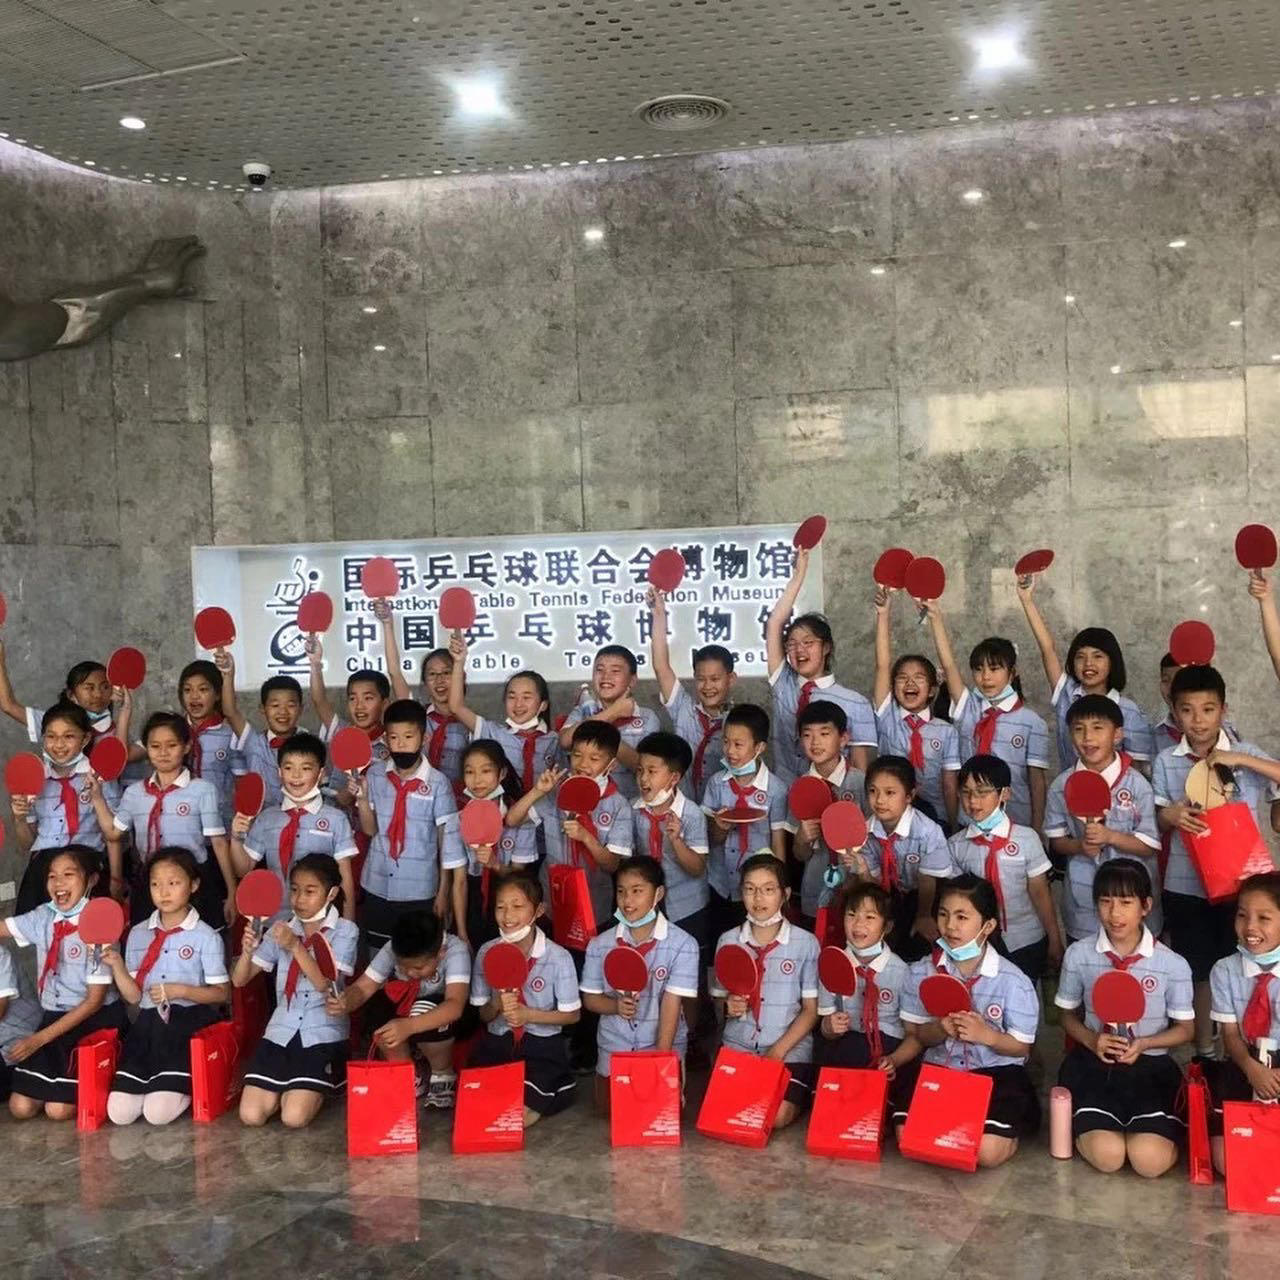 image  1 DHS Sports - DHS organizes Shanghai students’ summer camp #tabletennis_ittf table tennis museum#educ